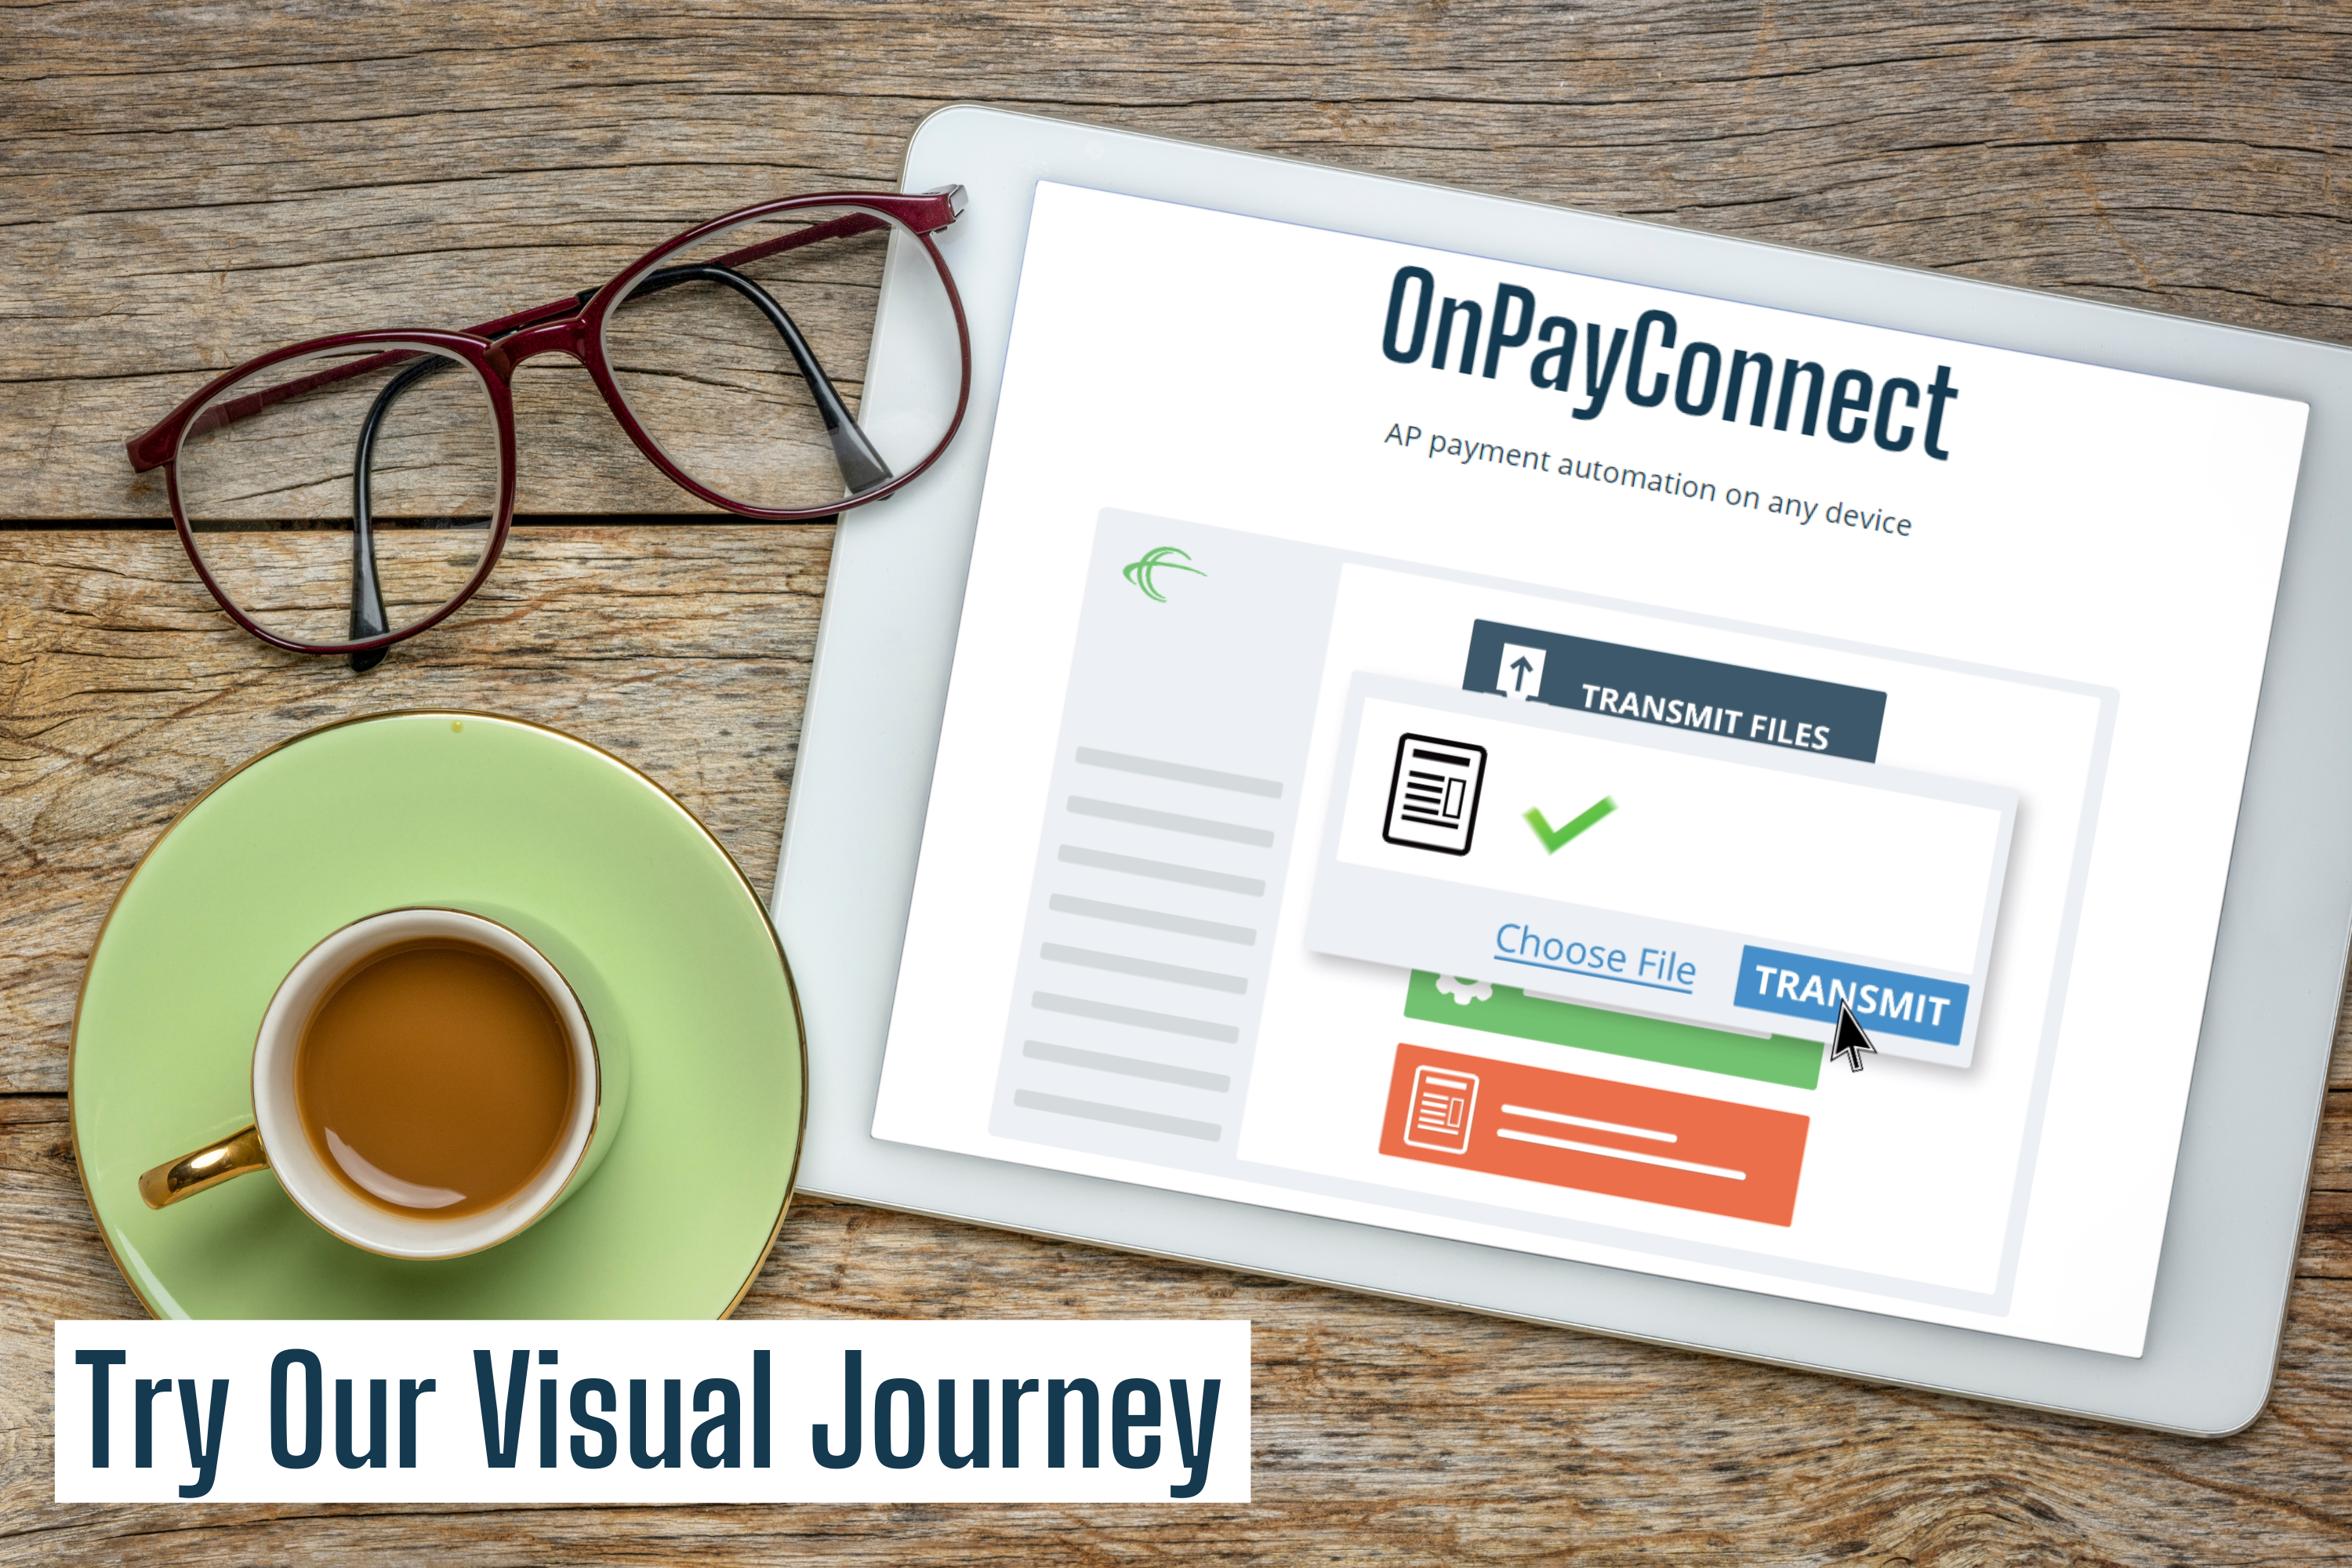 digital tablet with screen showing onpayconnect payment automation software visual journey